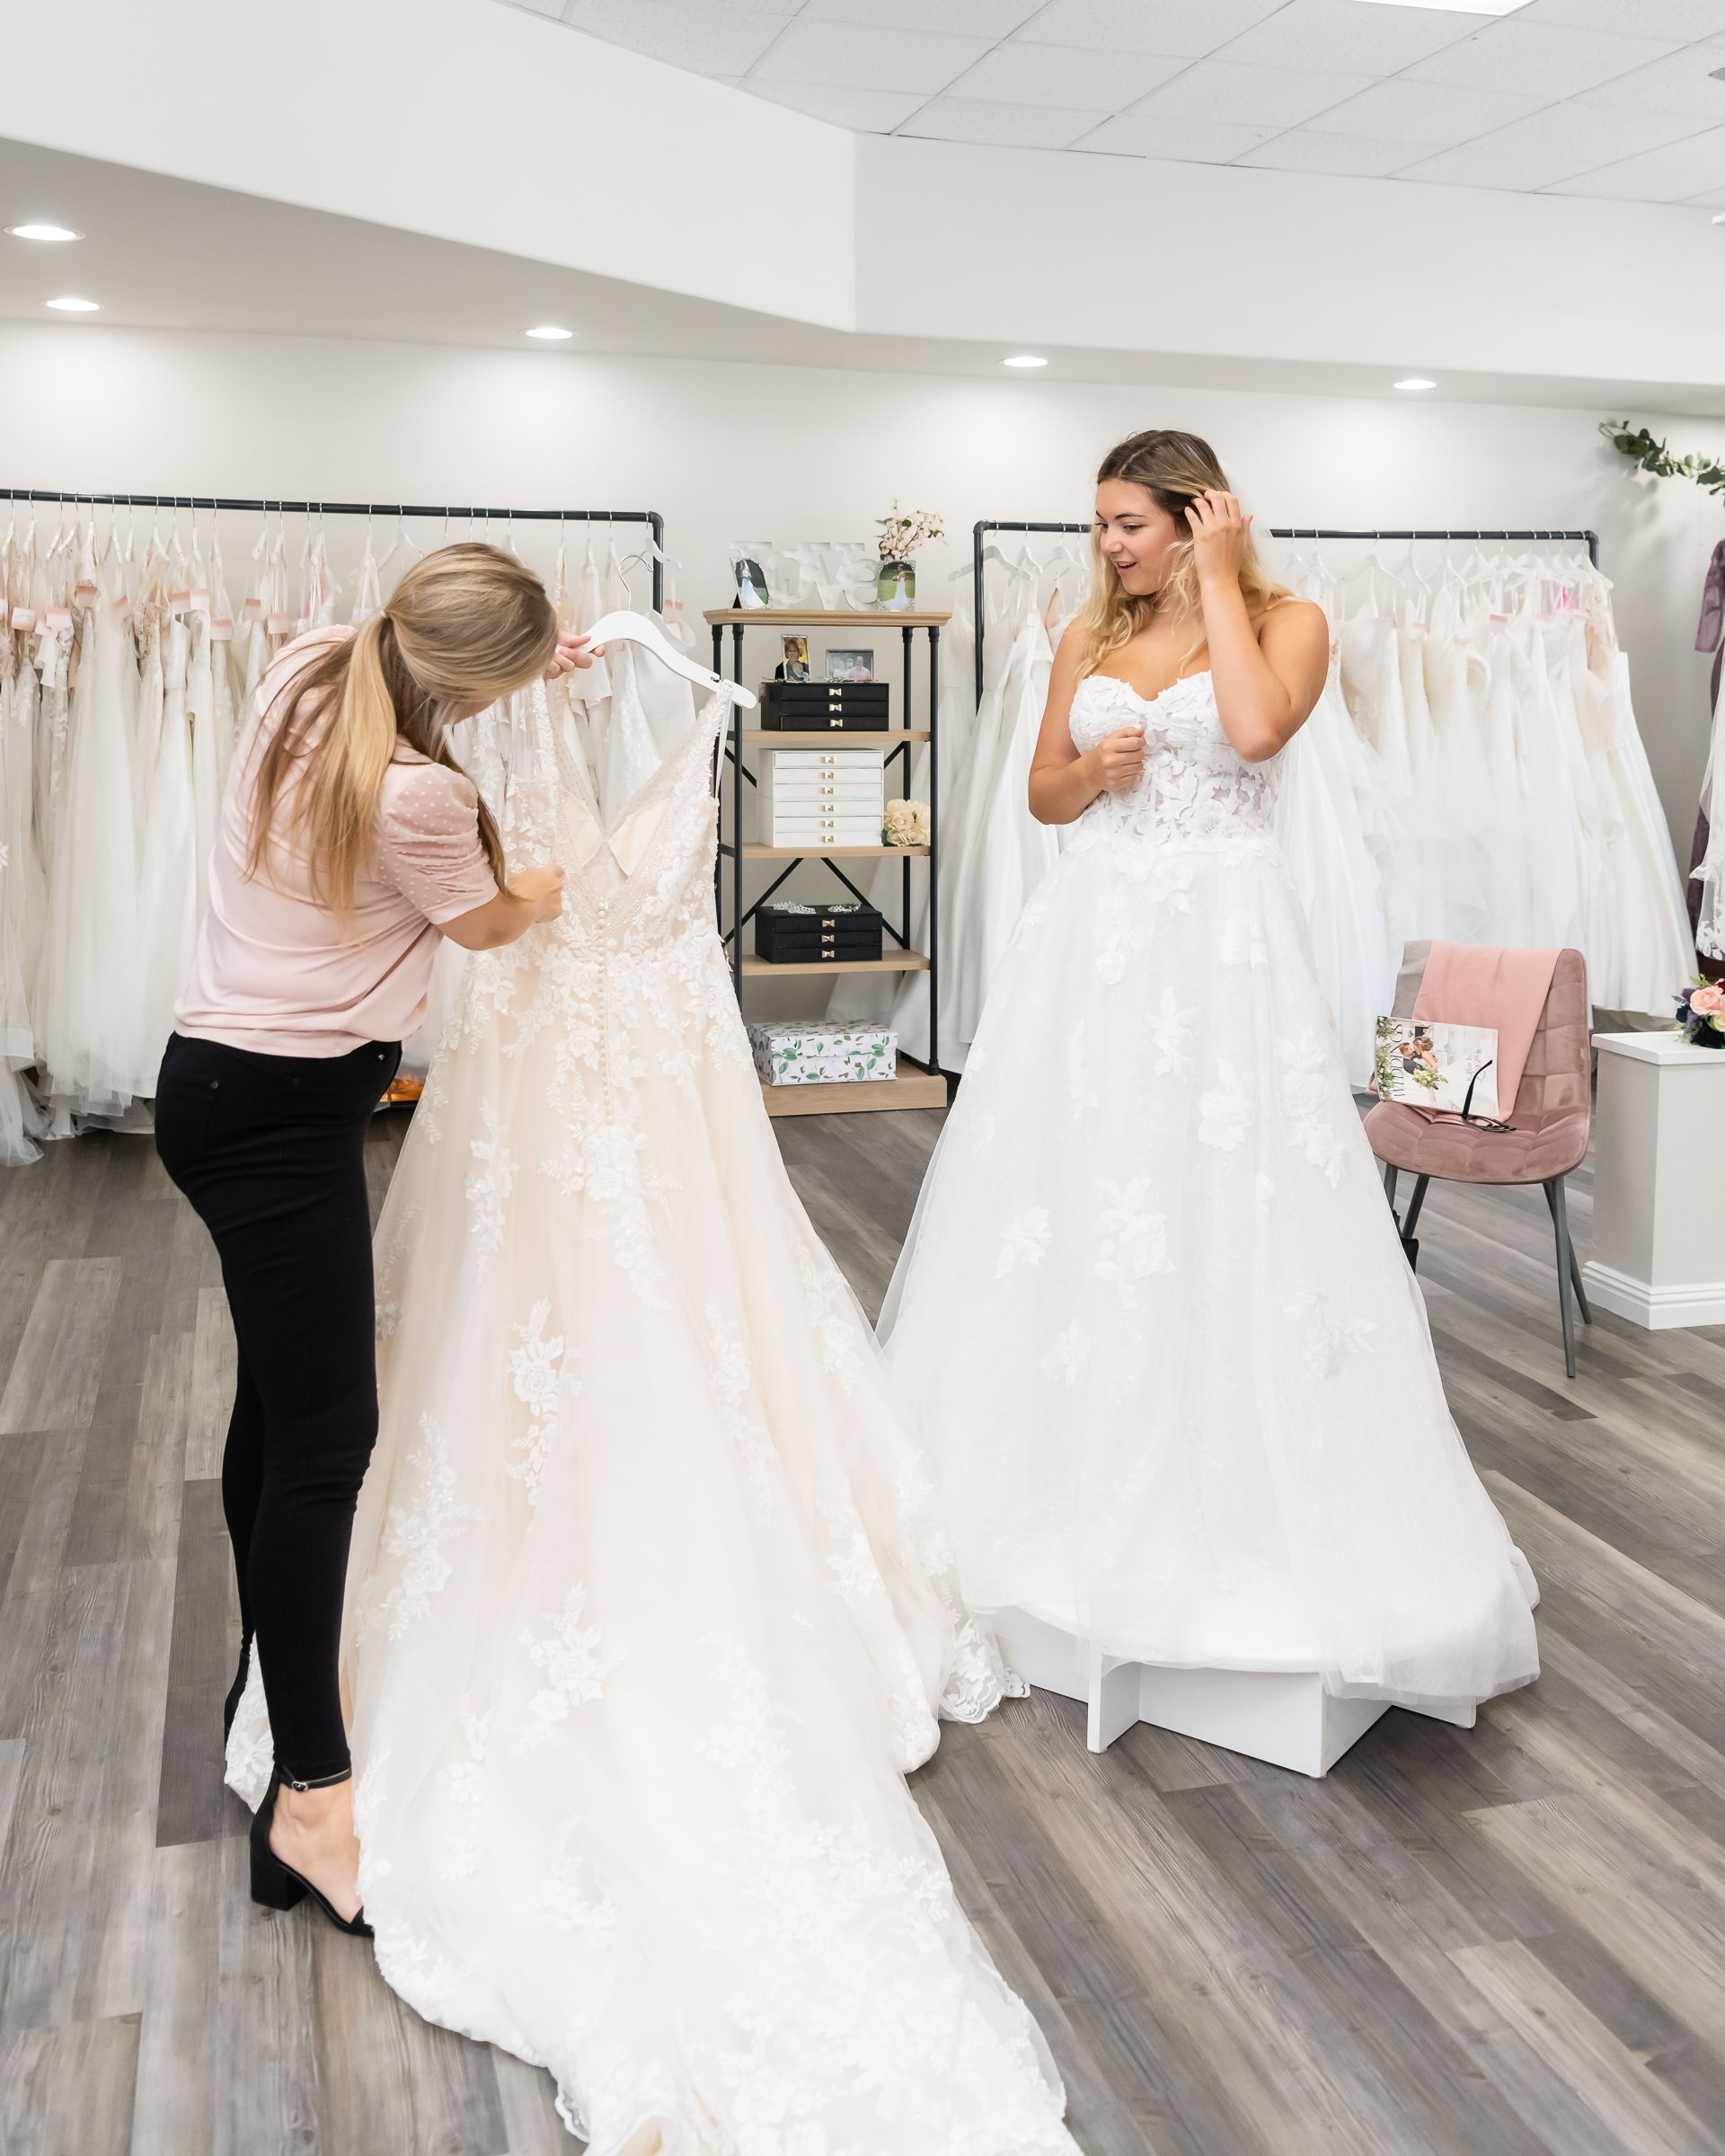 Mary Beth Moore shows a bride a dress from the High Point bridal boutique, Fallen In Love.